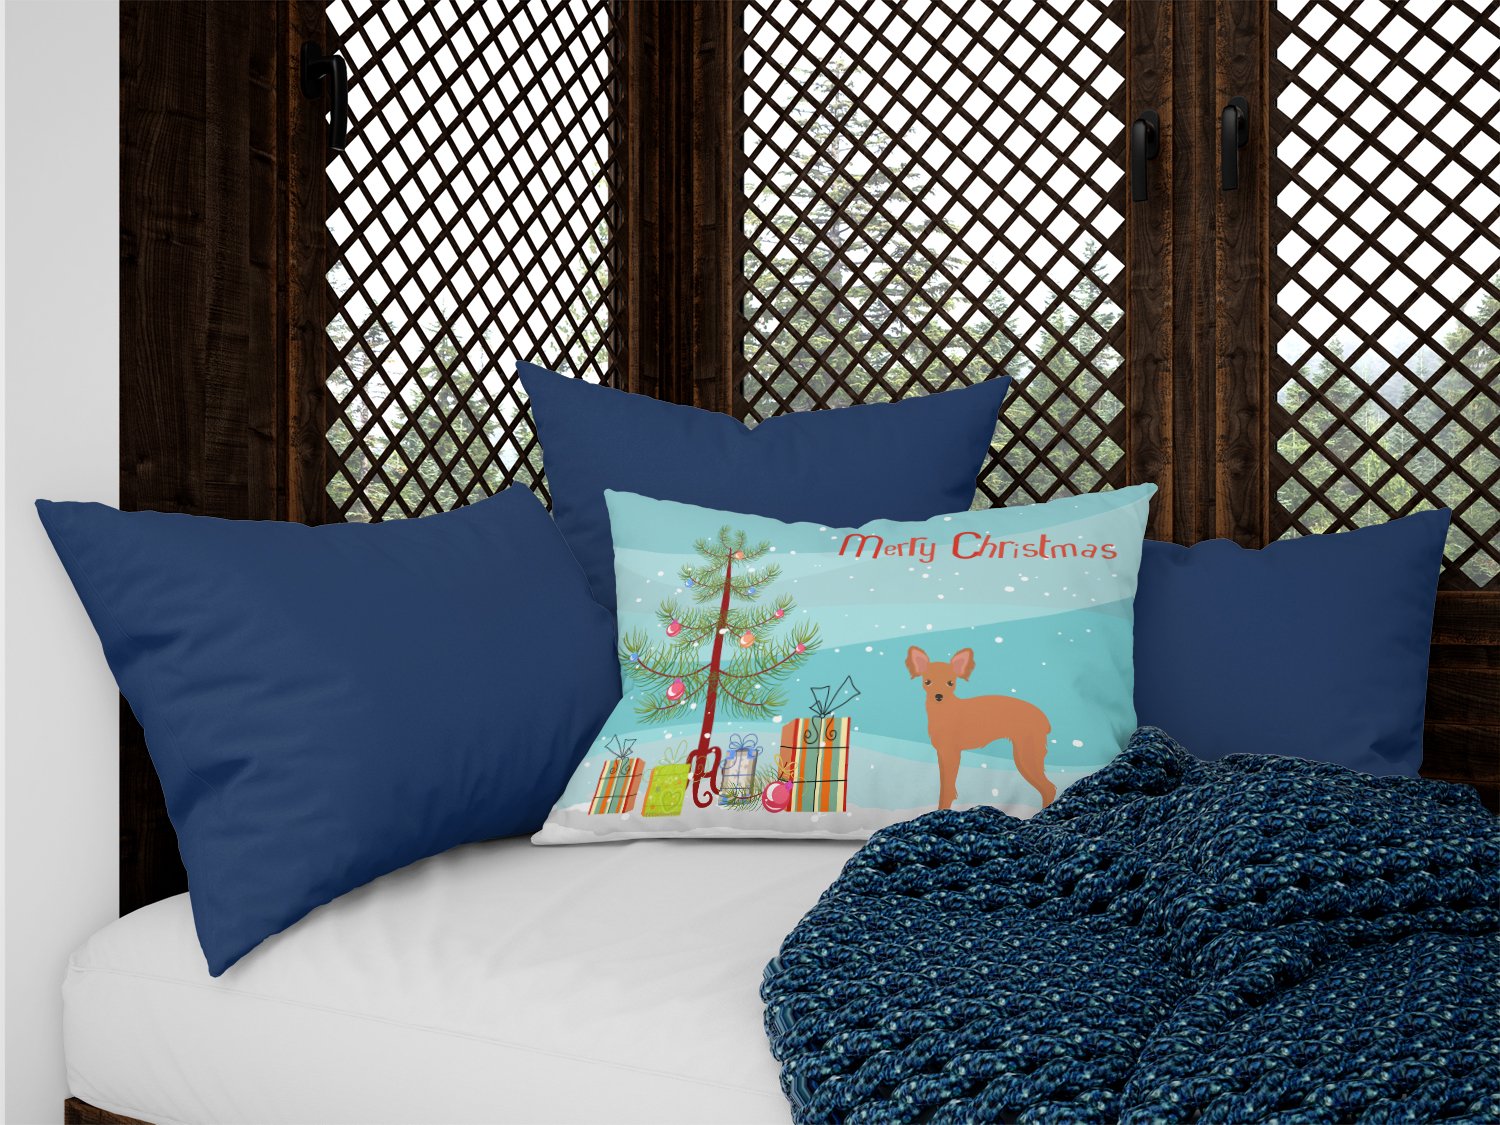 Russkiy Toy or Russian Toy Terrier Christmas Tree Canvas Fabric Decorative Pillow CK3484PW1216 by Caroline's Treasures